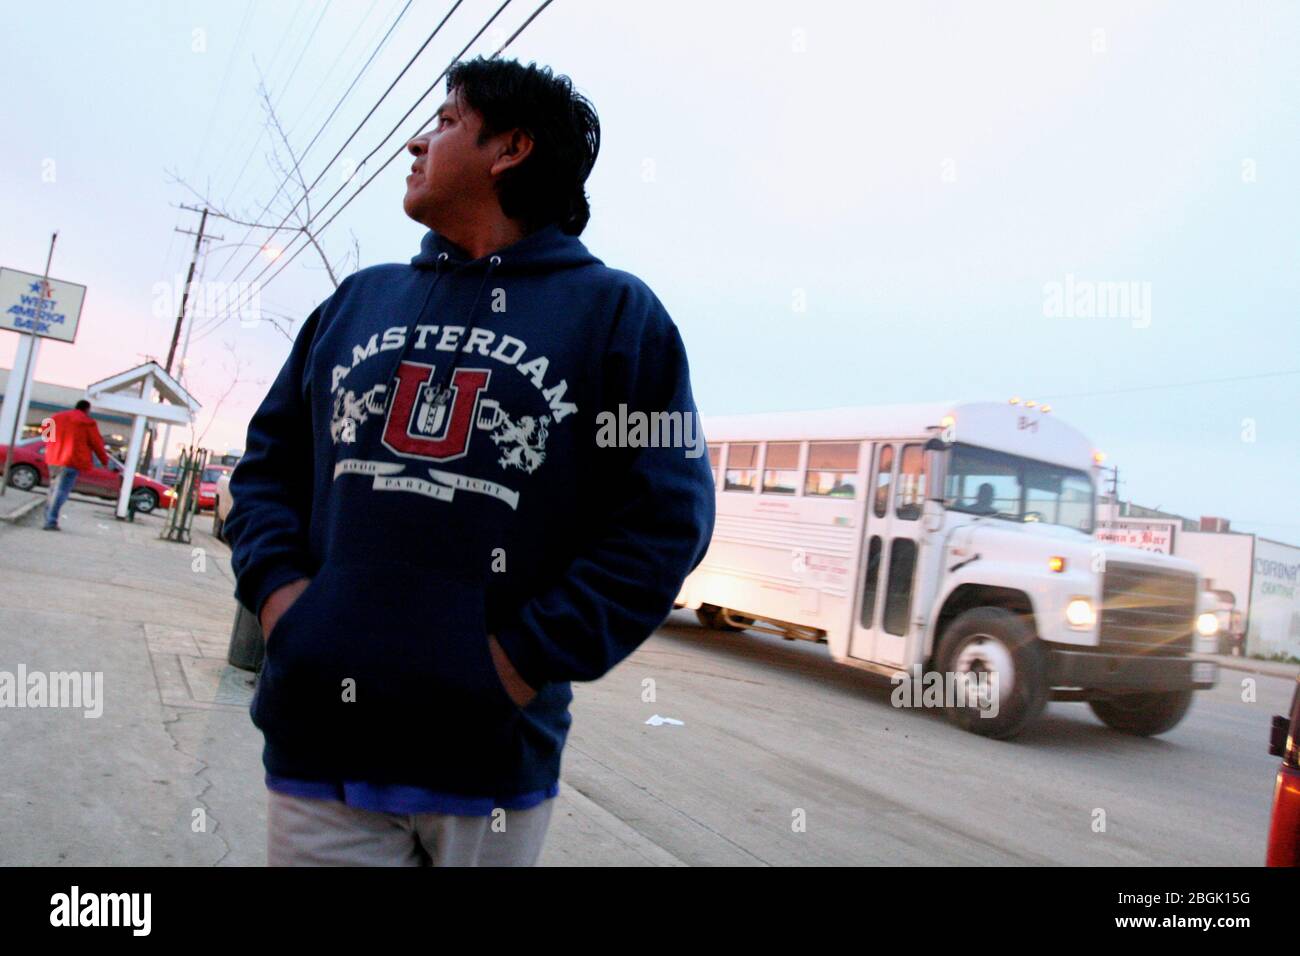 Huron, California, USA. 12th Apr, 2006. ENRIQUE, a mexican illegal immigrant farmworker, walks the streets of Huron at dawn in search of a days work picking lettuce. California's Central Valley offers at least seasonal jobs to 600,000 to 700,000 workers each year. Credit: Robert Gallagher/ZUMA Wire/Alamy Live News Stock Photo